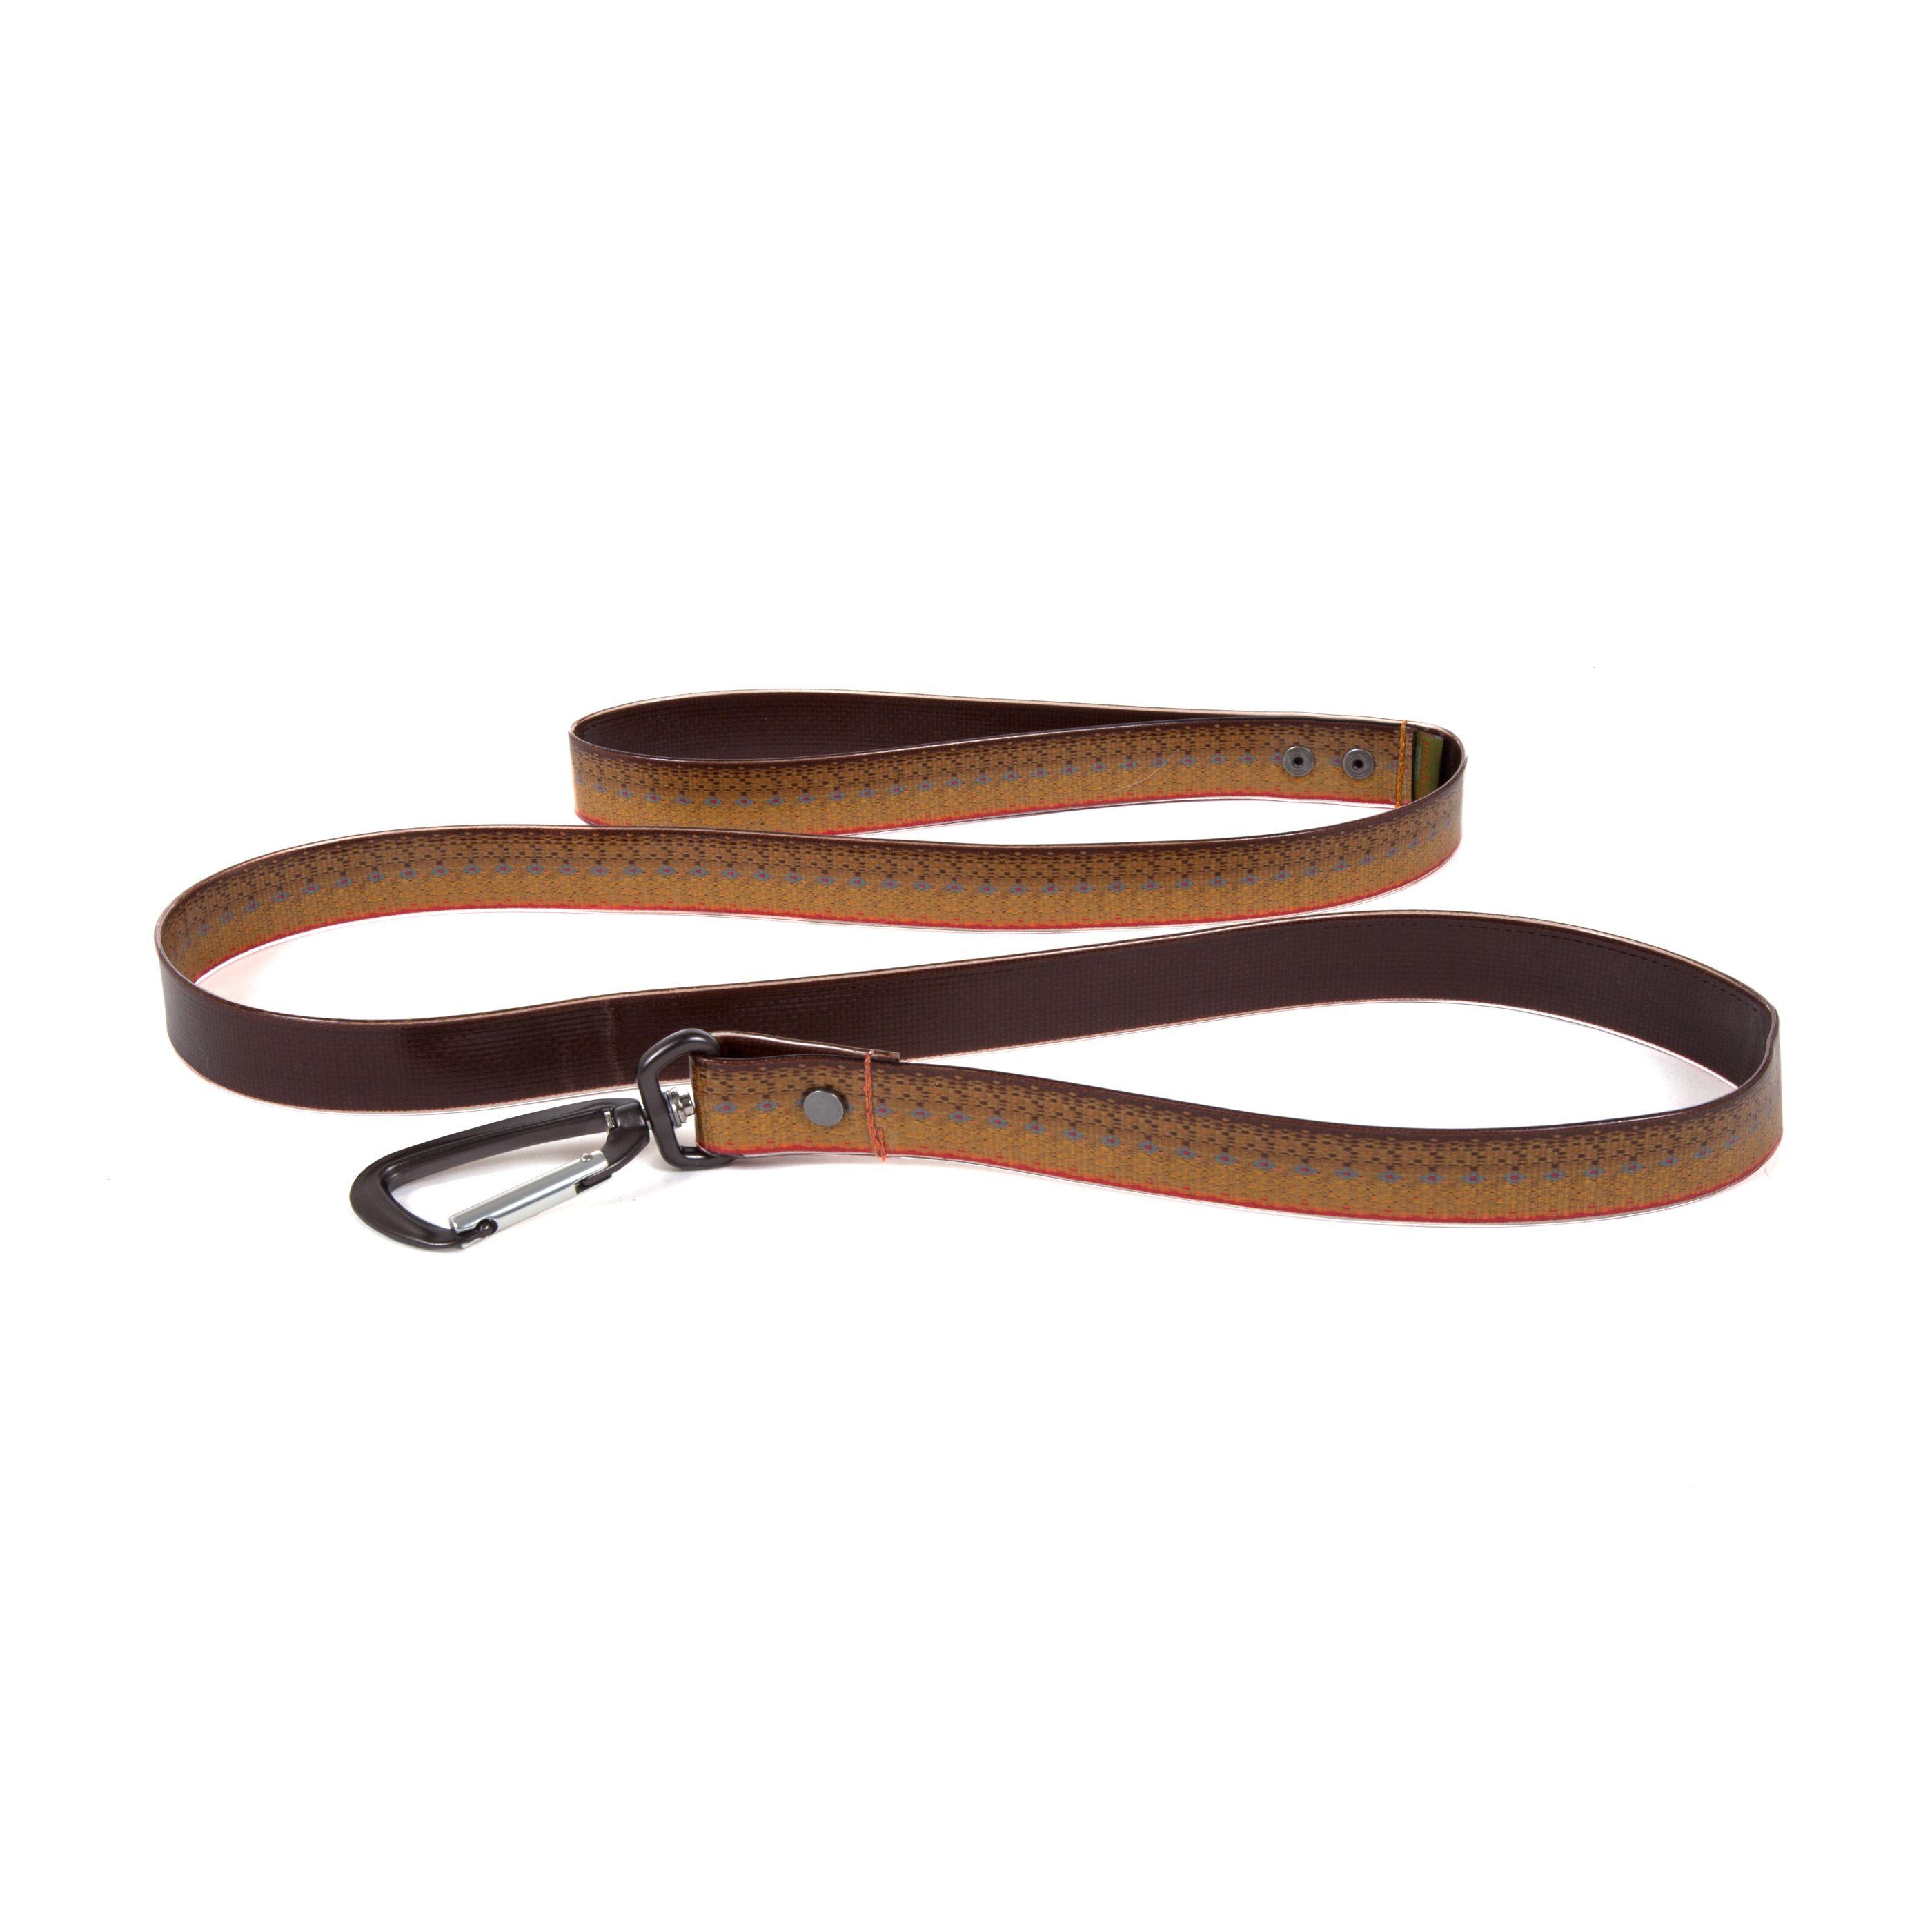 Fishpond Salty Dog Leash in Brown Trout